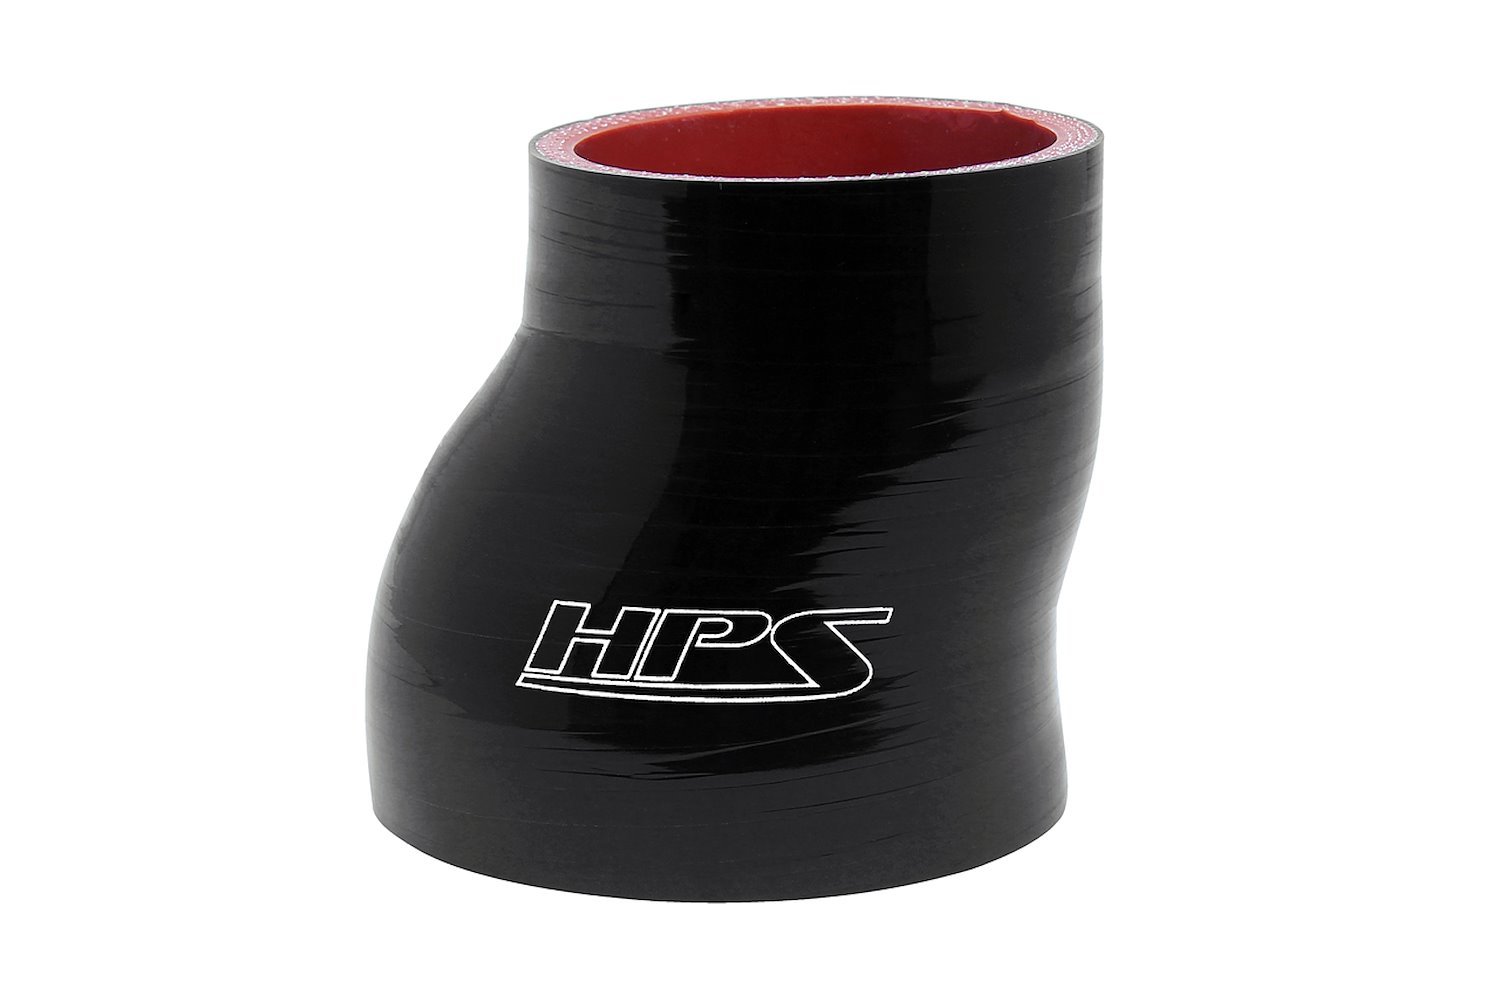 HTSOR-300-350-L6-BLK Silicone Offset Reducer Hose, High-Temp Reinforced, 3 in. - 3-1/2 in. ID, 6 in. Long, Black